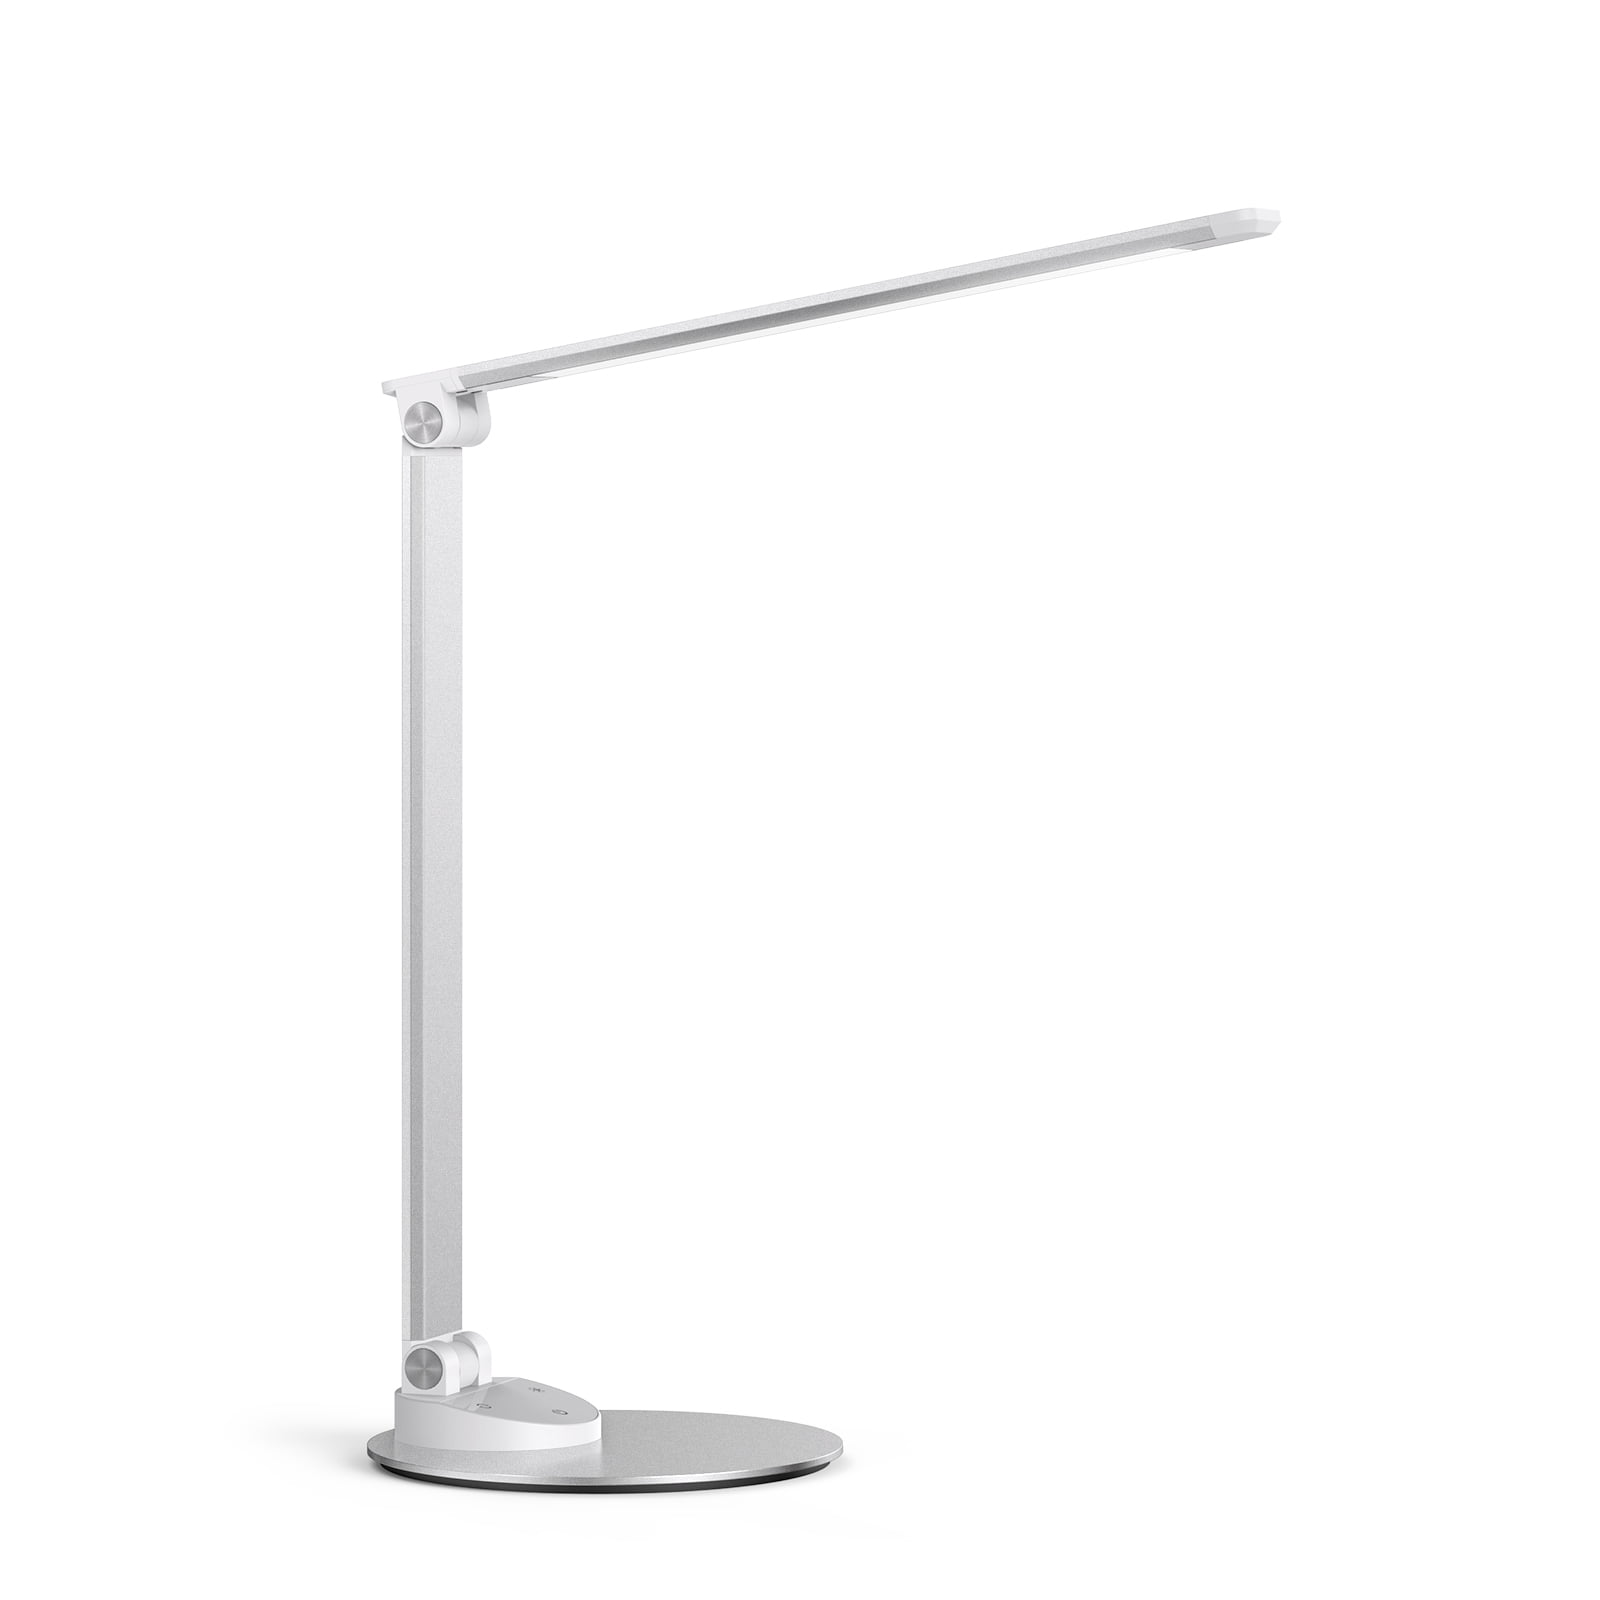 Work Black Eye Care Reading Lamp for Study LED Desk Lamp Touch Control Table Lamps USB Plug-in Powered Dimmable Office Lamp with USB Charging Port 